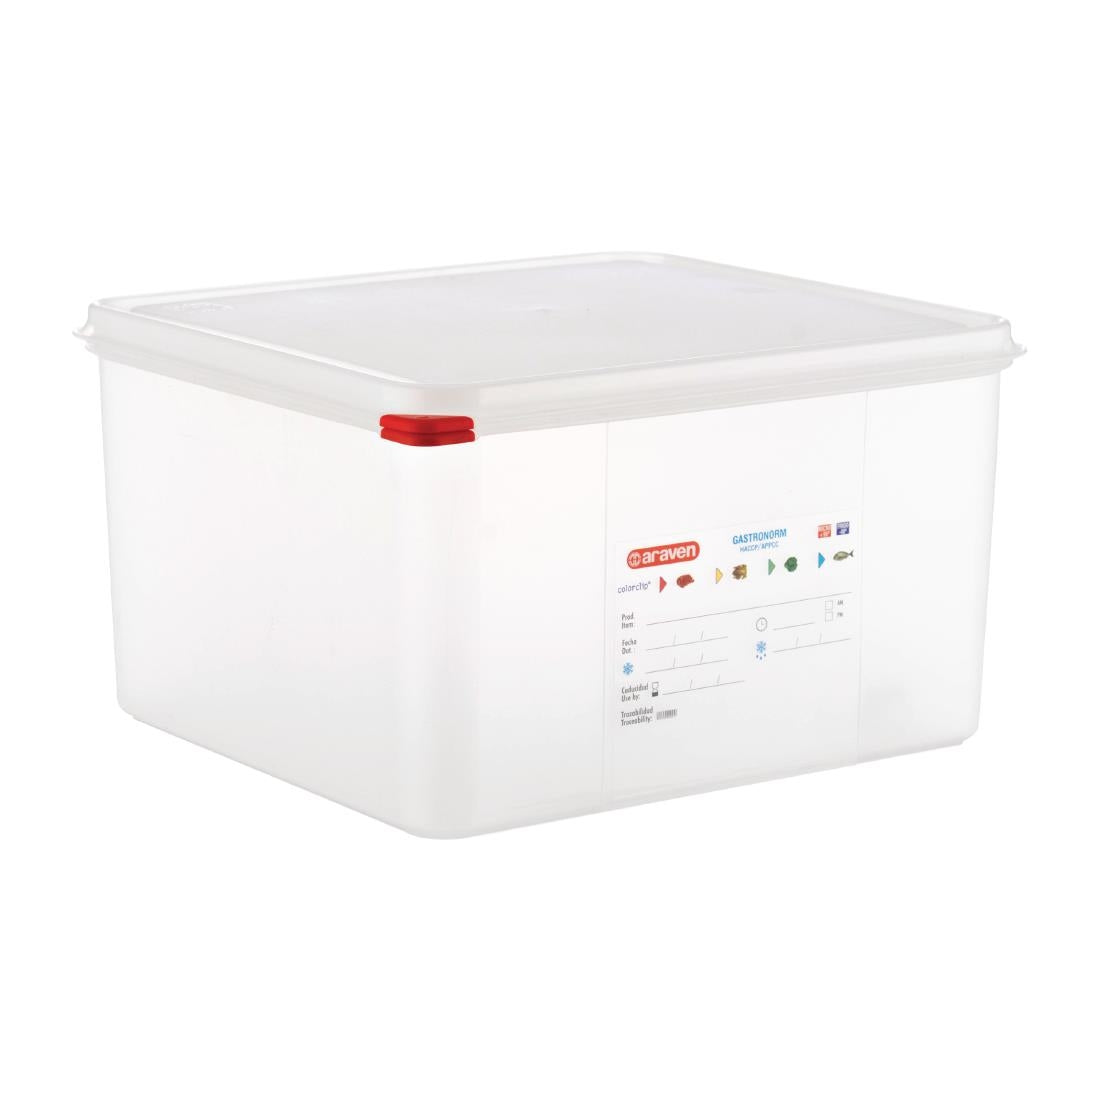 DL983 Araven Polypropylene 2/3 Gastronorm Food Storage Container 19Ltr (Pack of 4) JD Catering Equipment Solutions Ltd